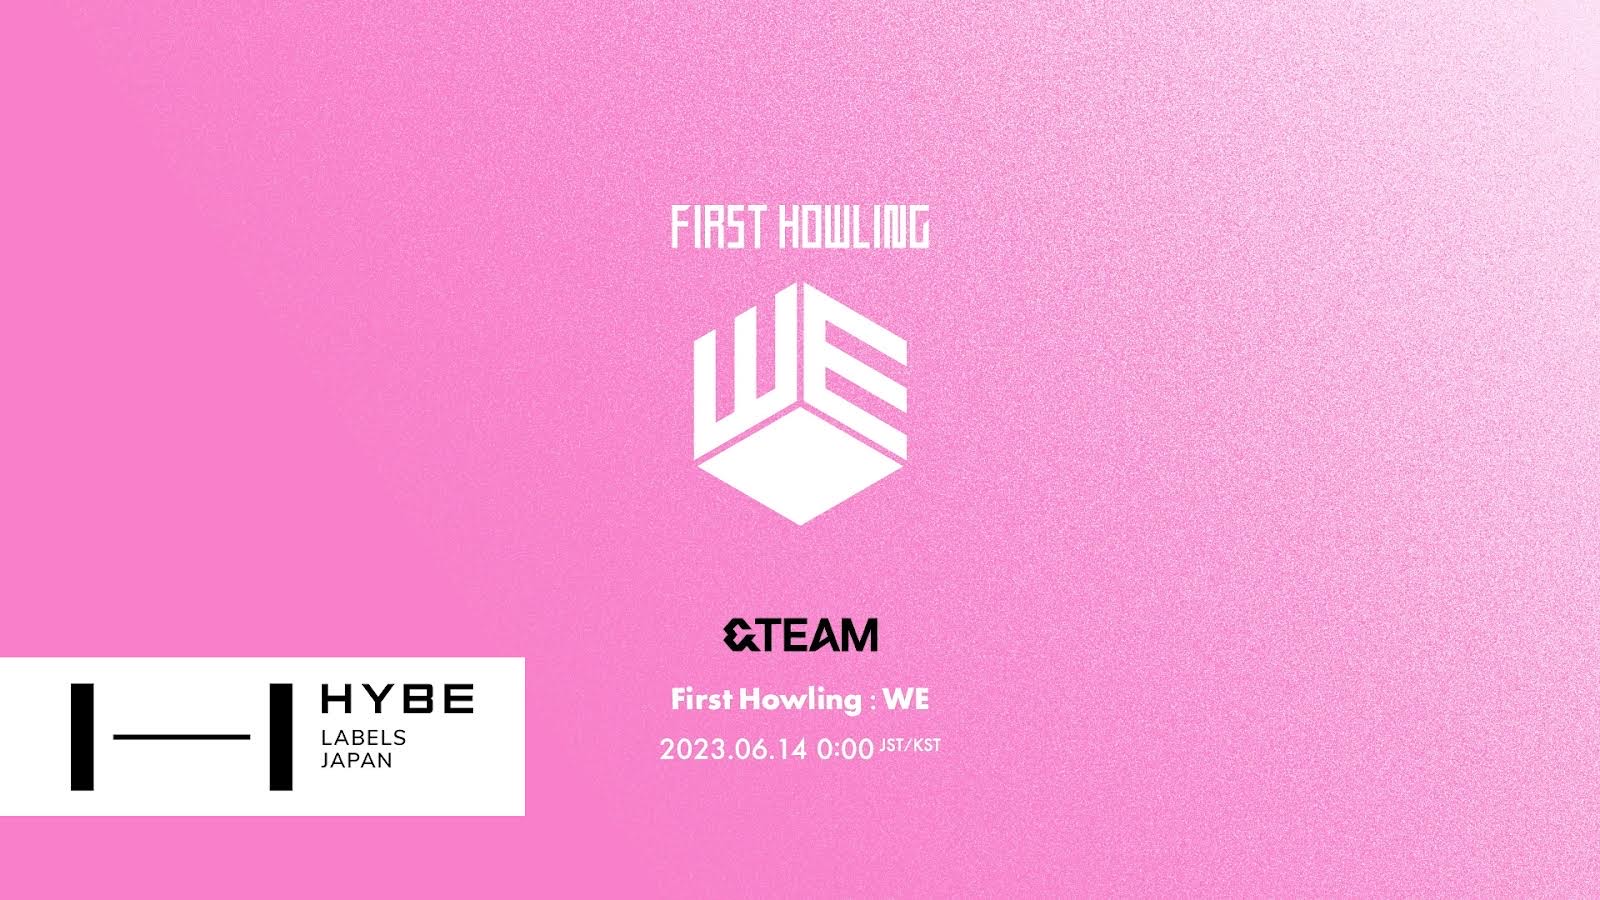 「First Howling : WE」 &TEAMが2枚目のEPタイトル発表&モーションロゴ公開